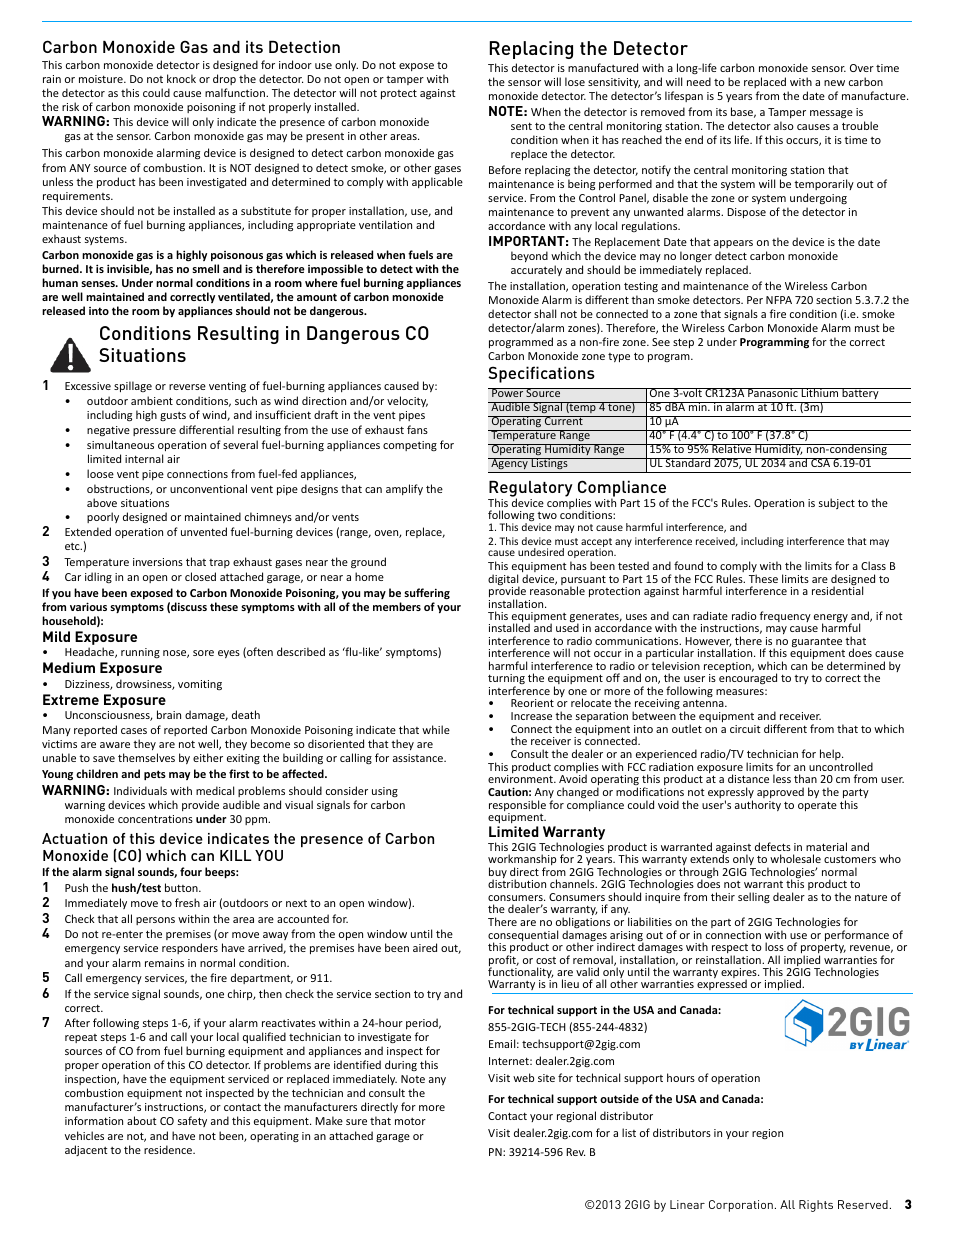 Conditions resulting in dangerous co situations, Replacing the detector, Carbon monoxide gas and its detection | Specifications regulatory compliance | 2GIG CO3-345 Carbon Monoxide Detector User Manual | Page 3 / 3